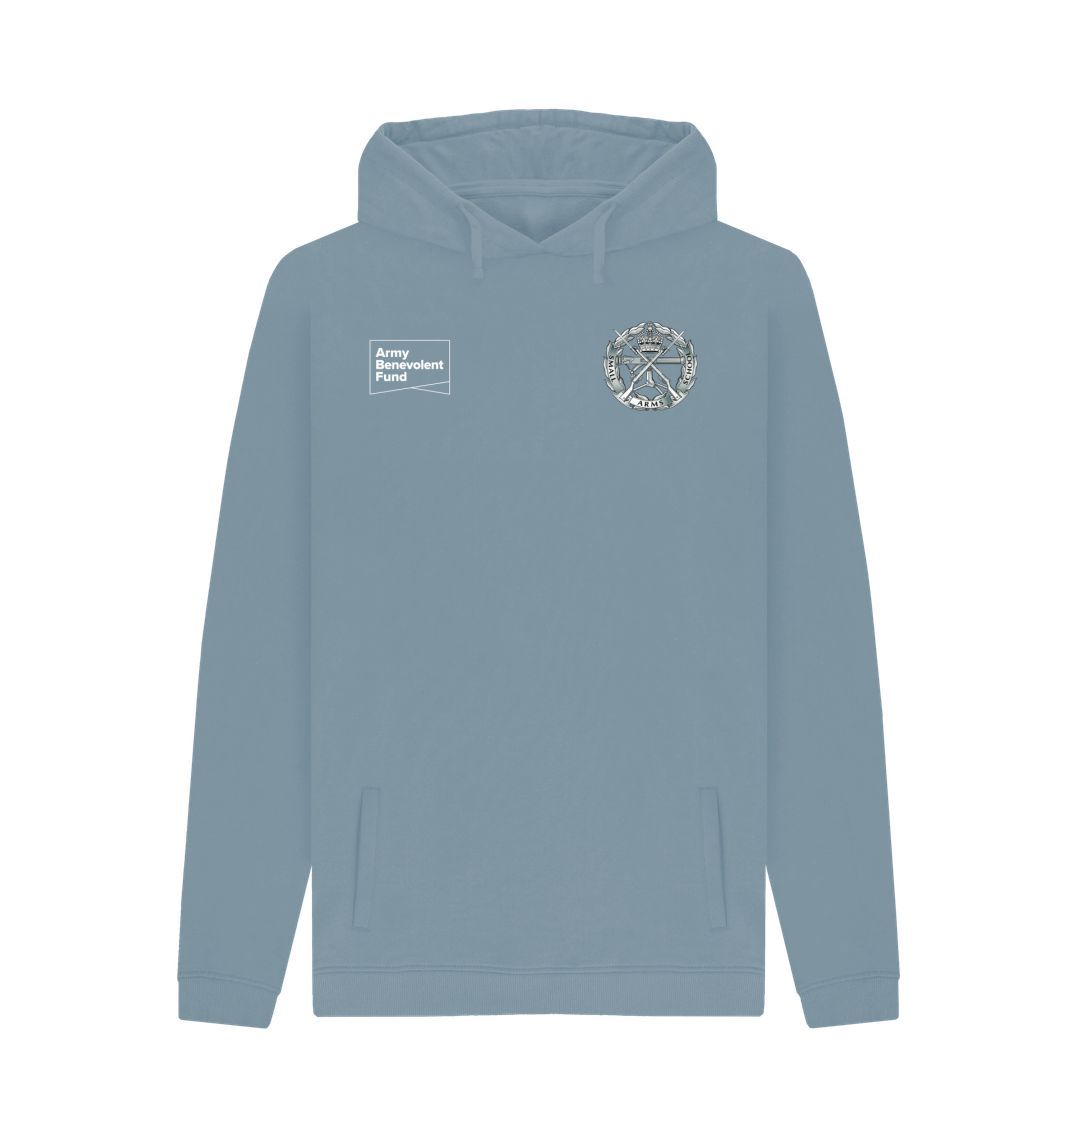 Small Arms School Corps Unisex Hoodie - Army Benevolent Fund